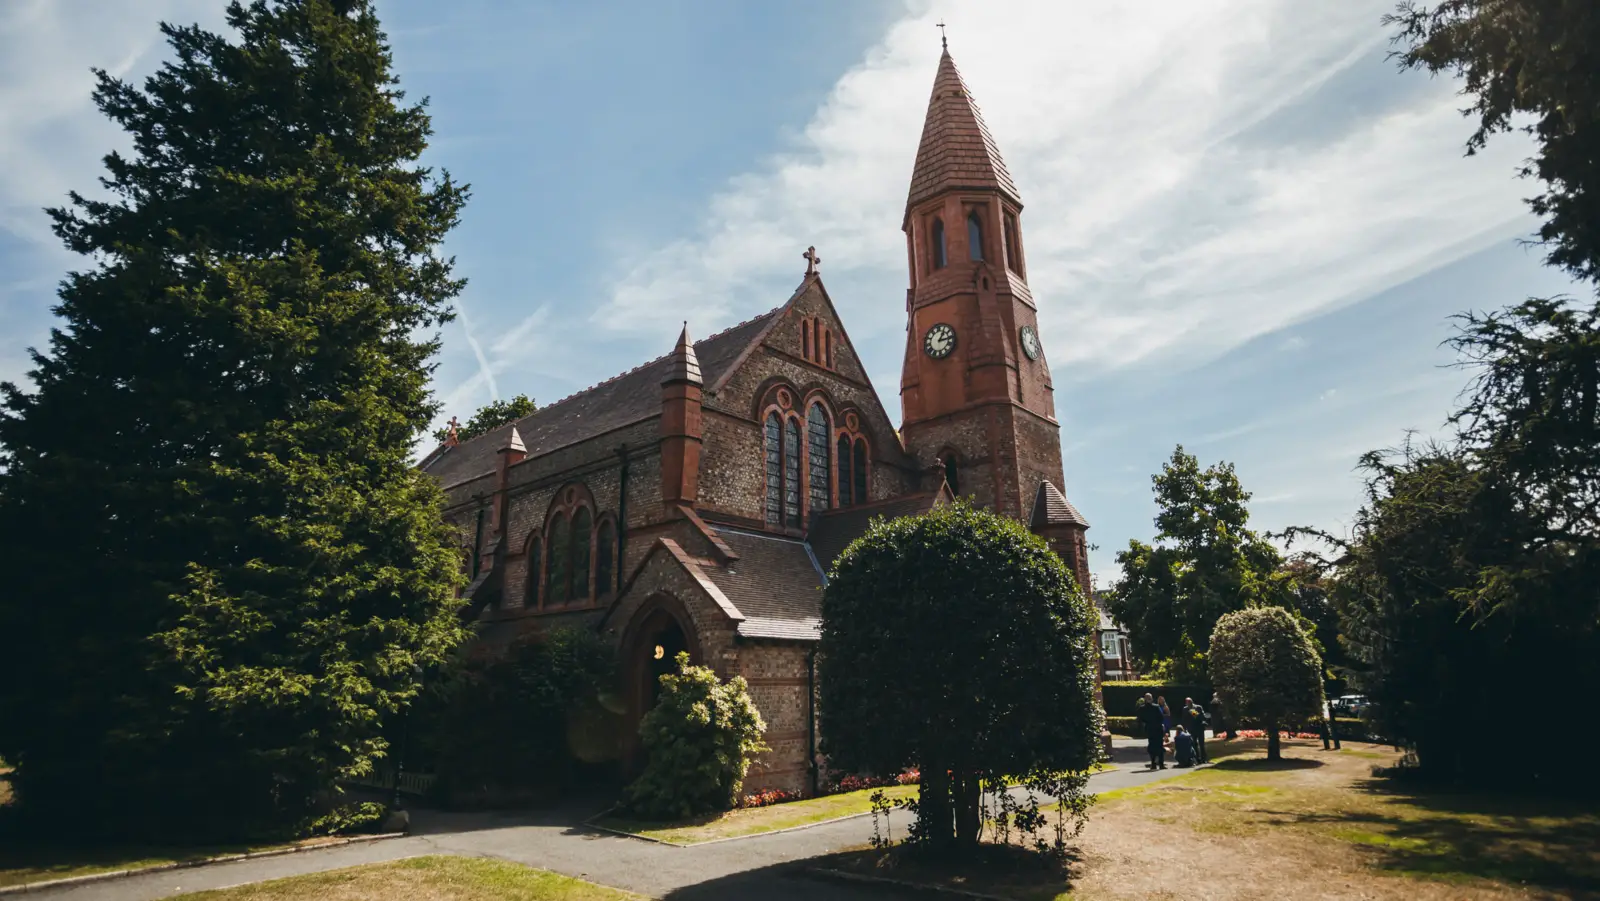 Hale church to hold artisan market as it looks to improve finances